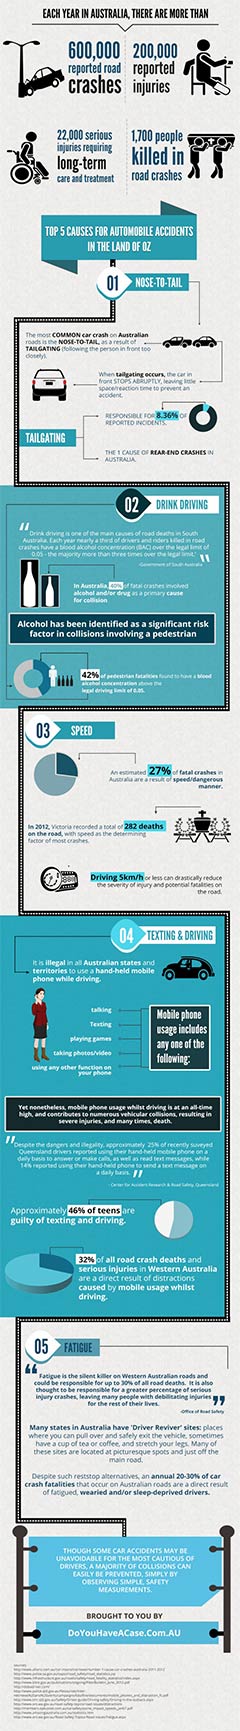 Car accidents in Australia infographic